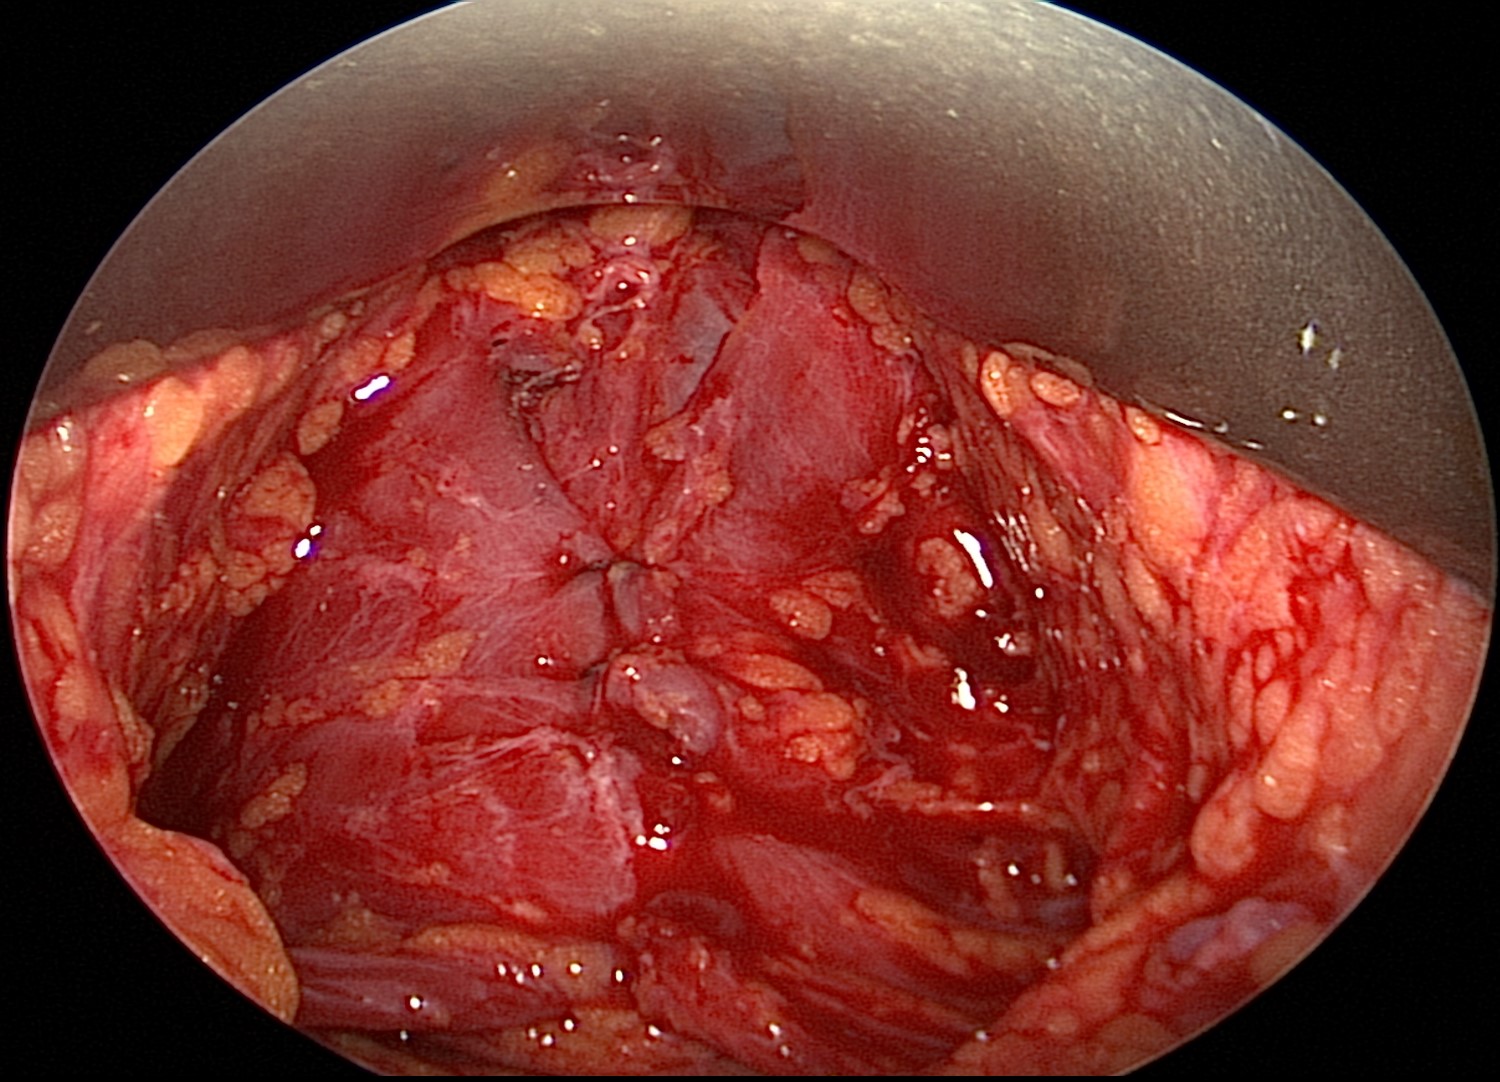 Endoscopic view of the platysma after suturing the left and right sides together in the midline, which will decrease appearance of vertical bands in the neck